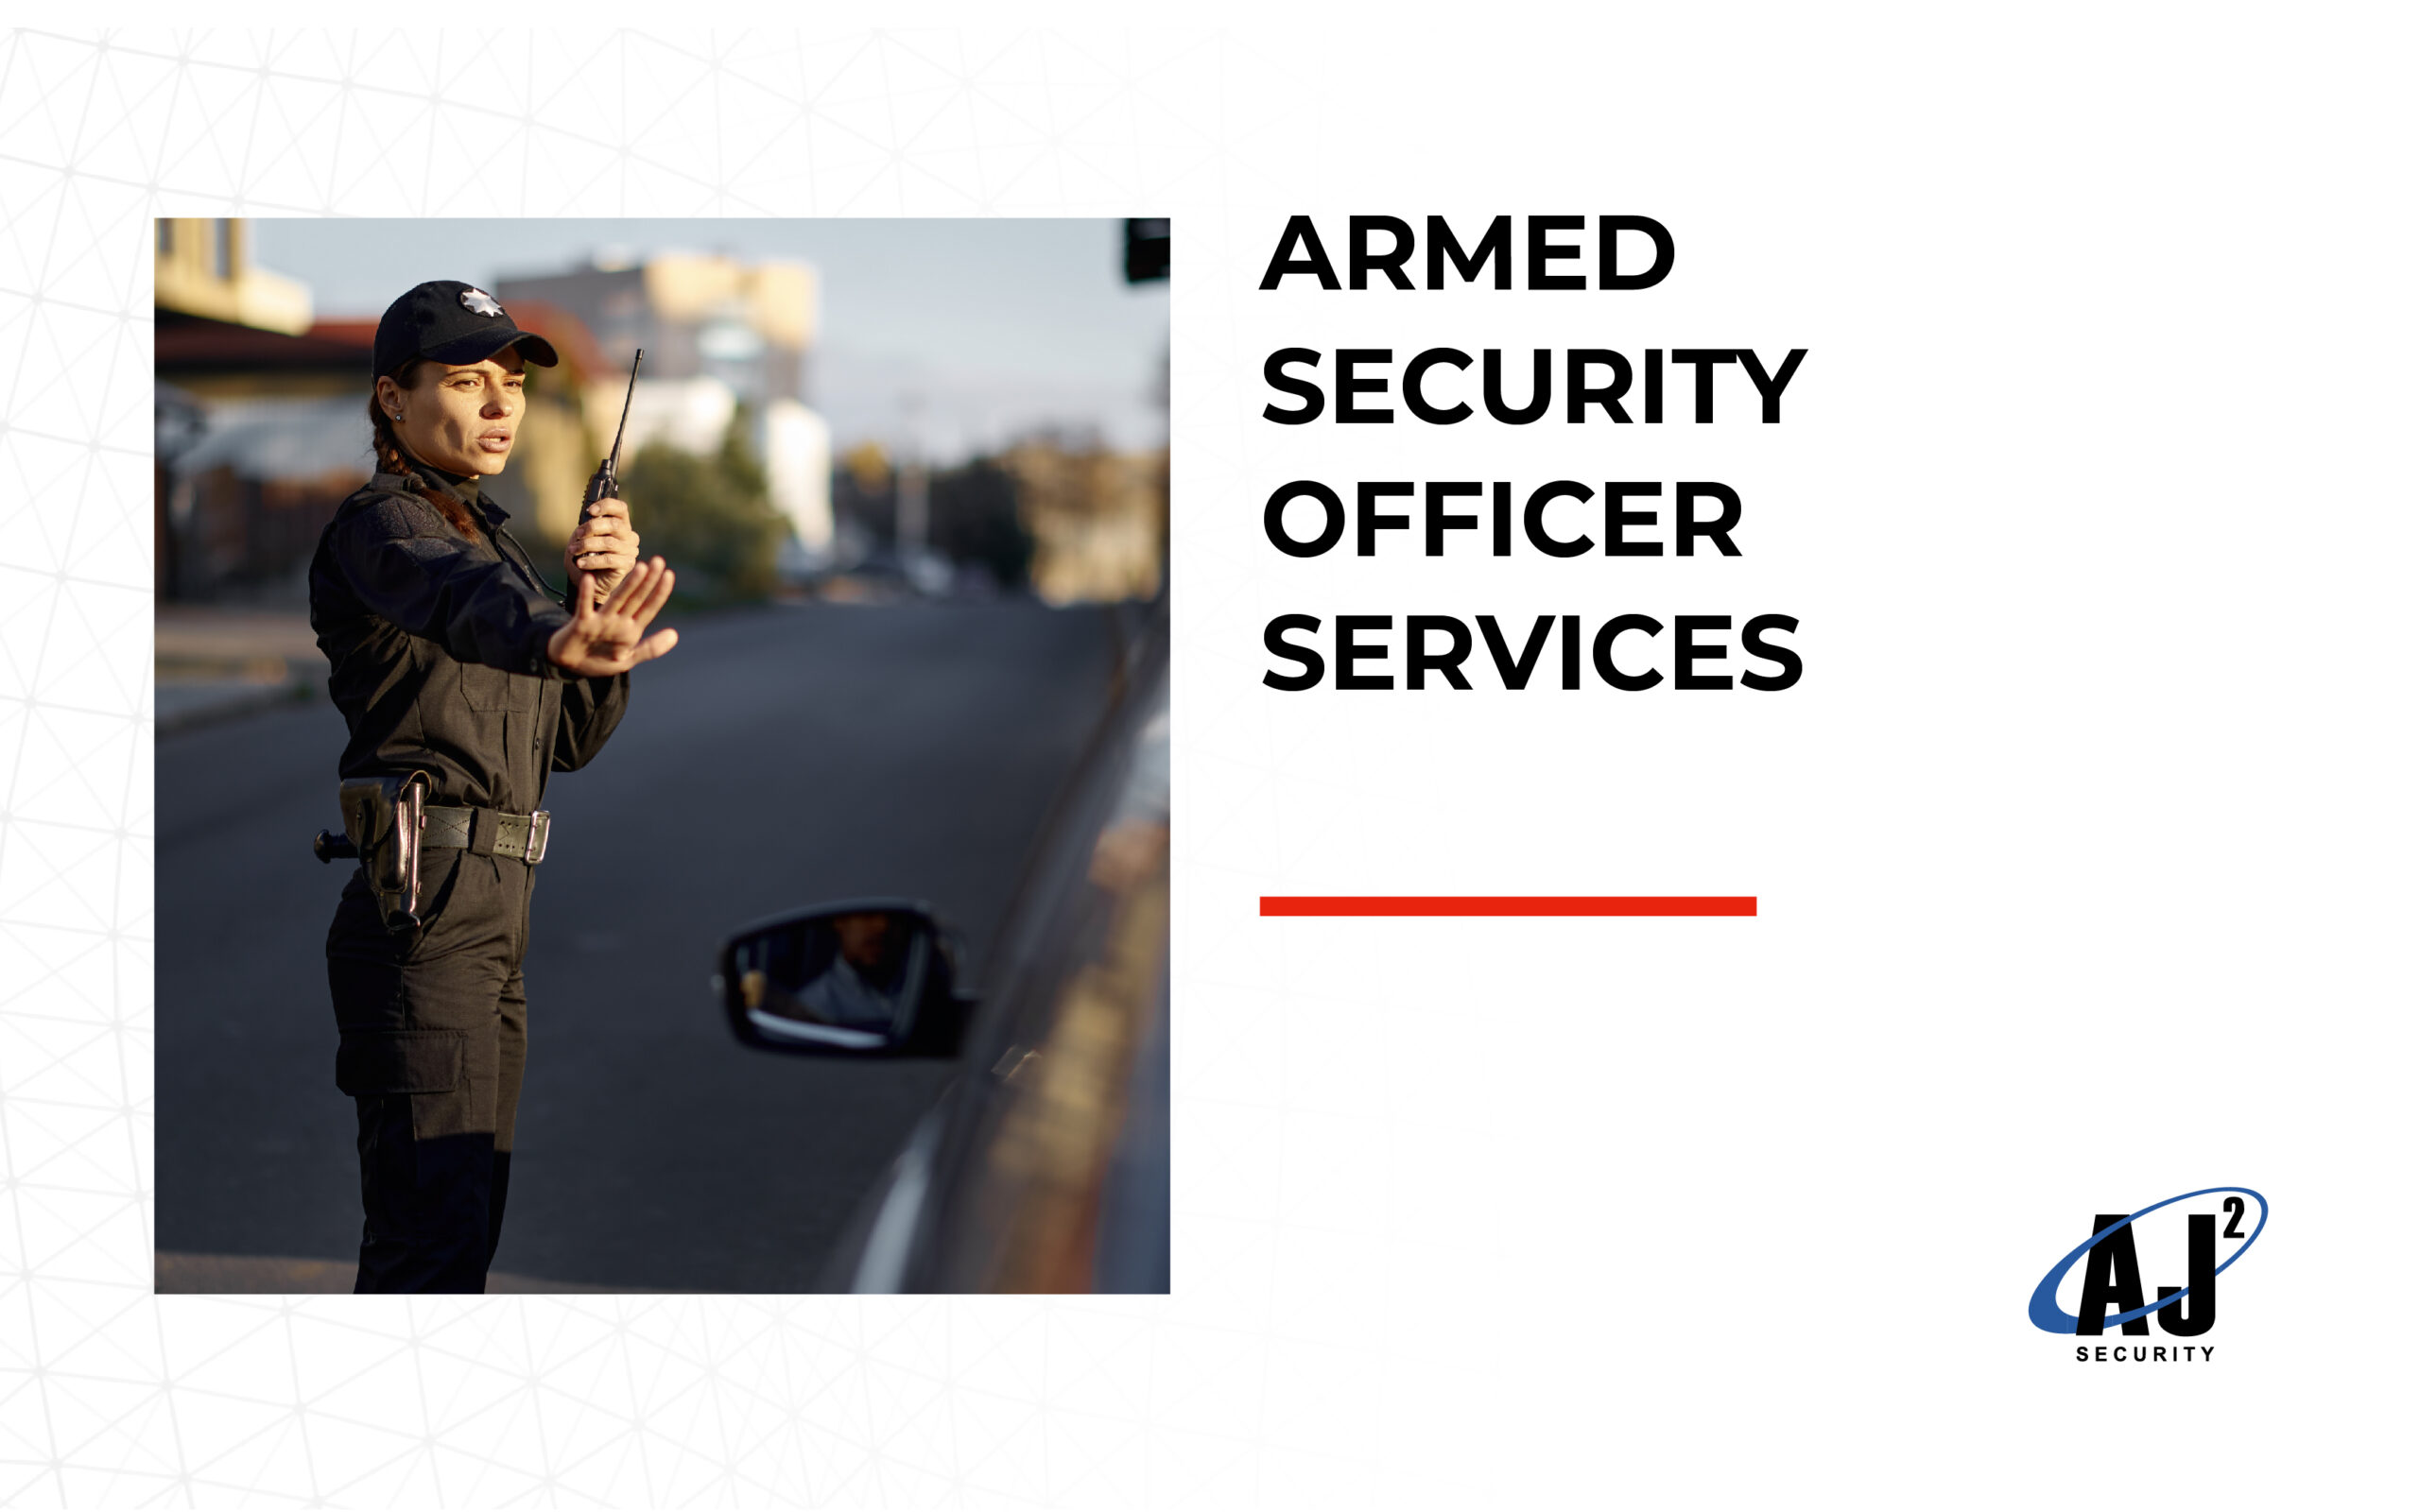 While unarmed guards play a valuable role, armed security officer services can provide more substantial protective measures in some situations.